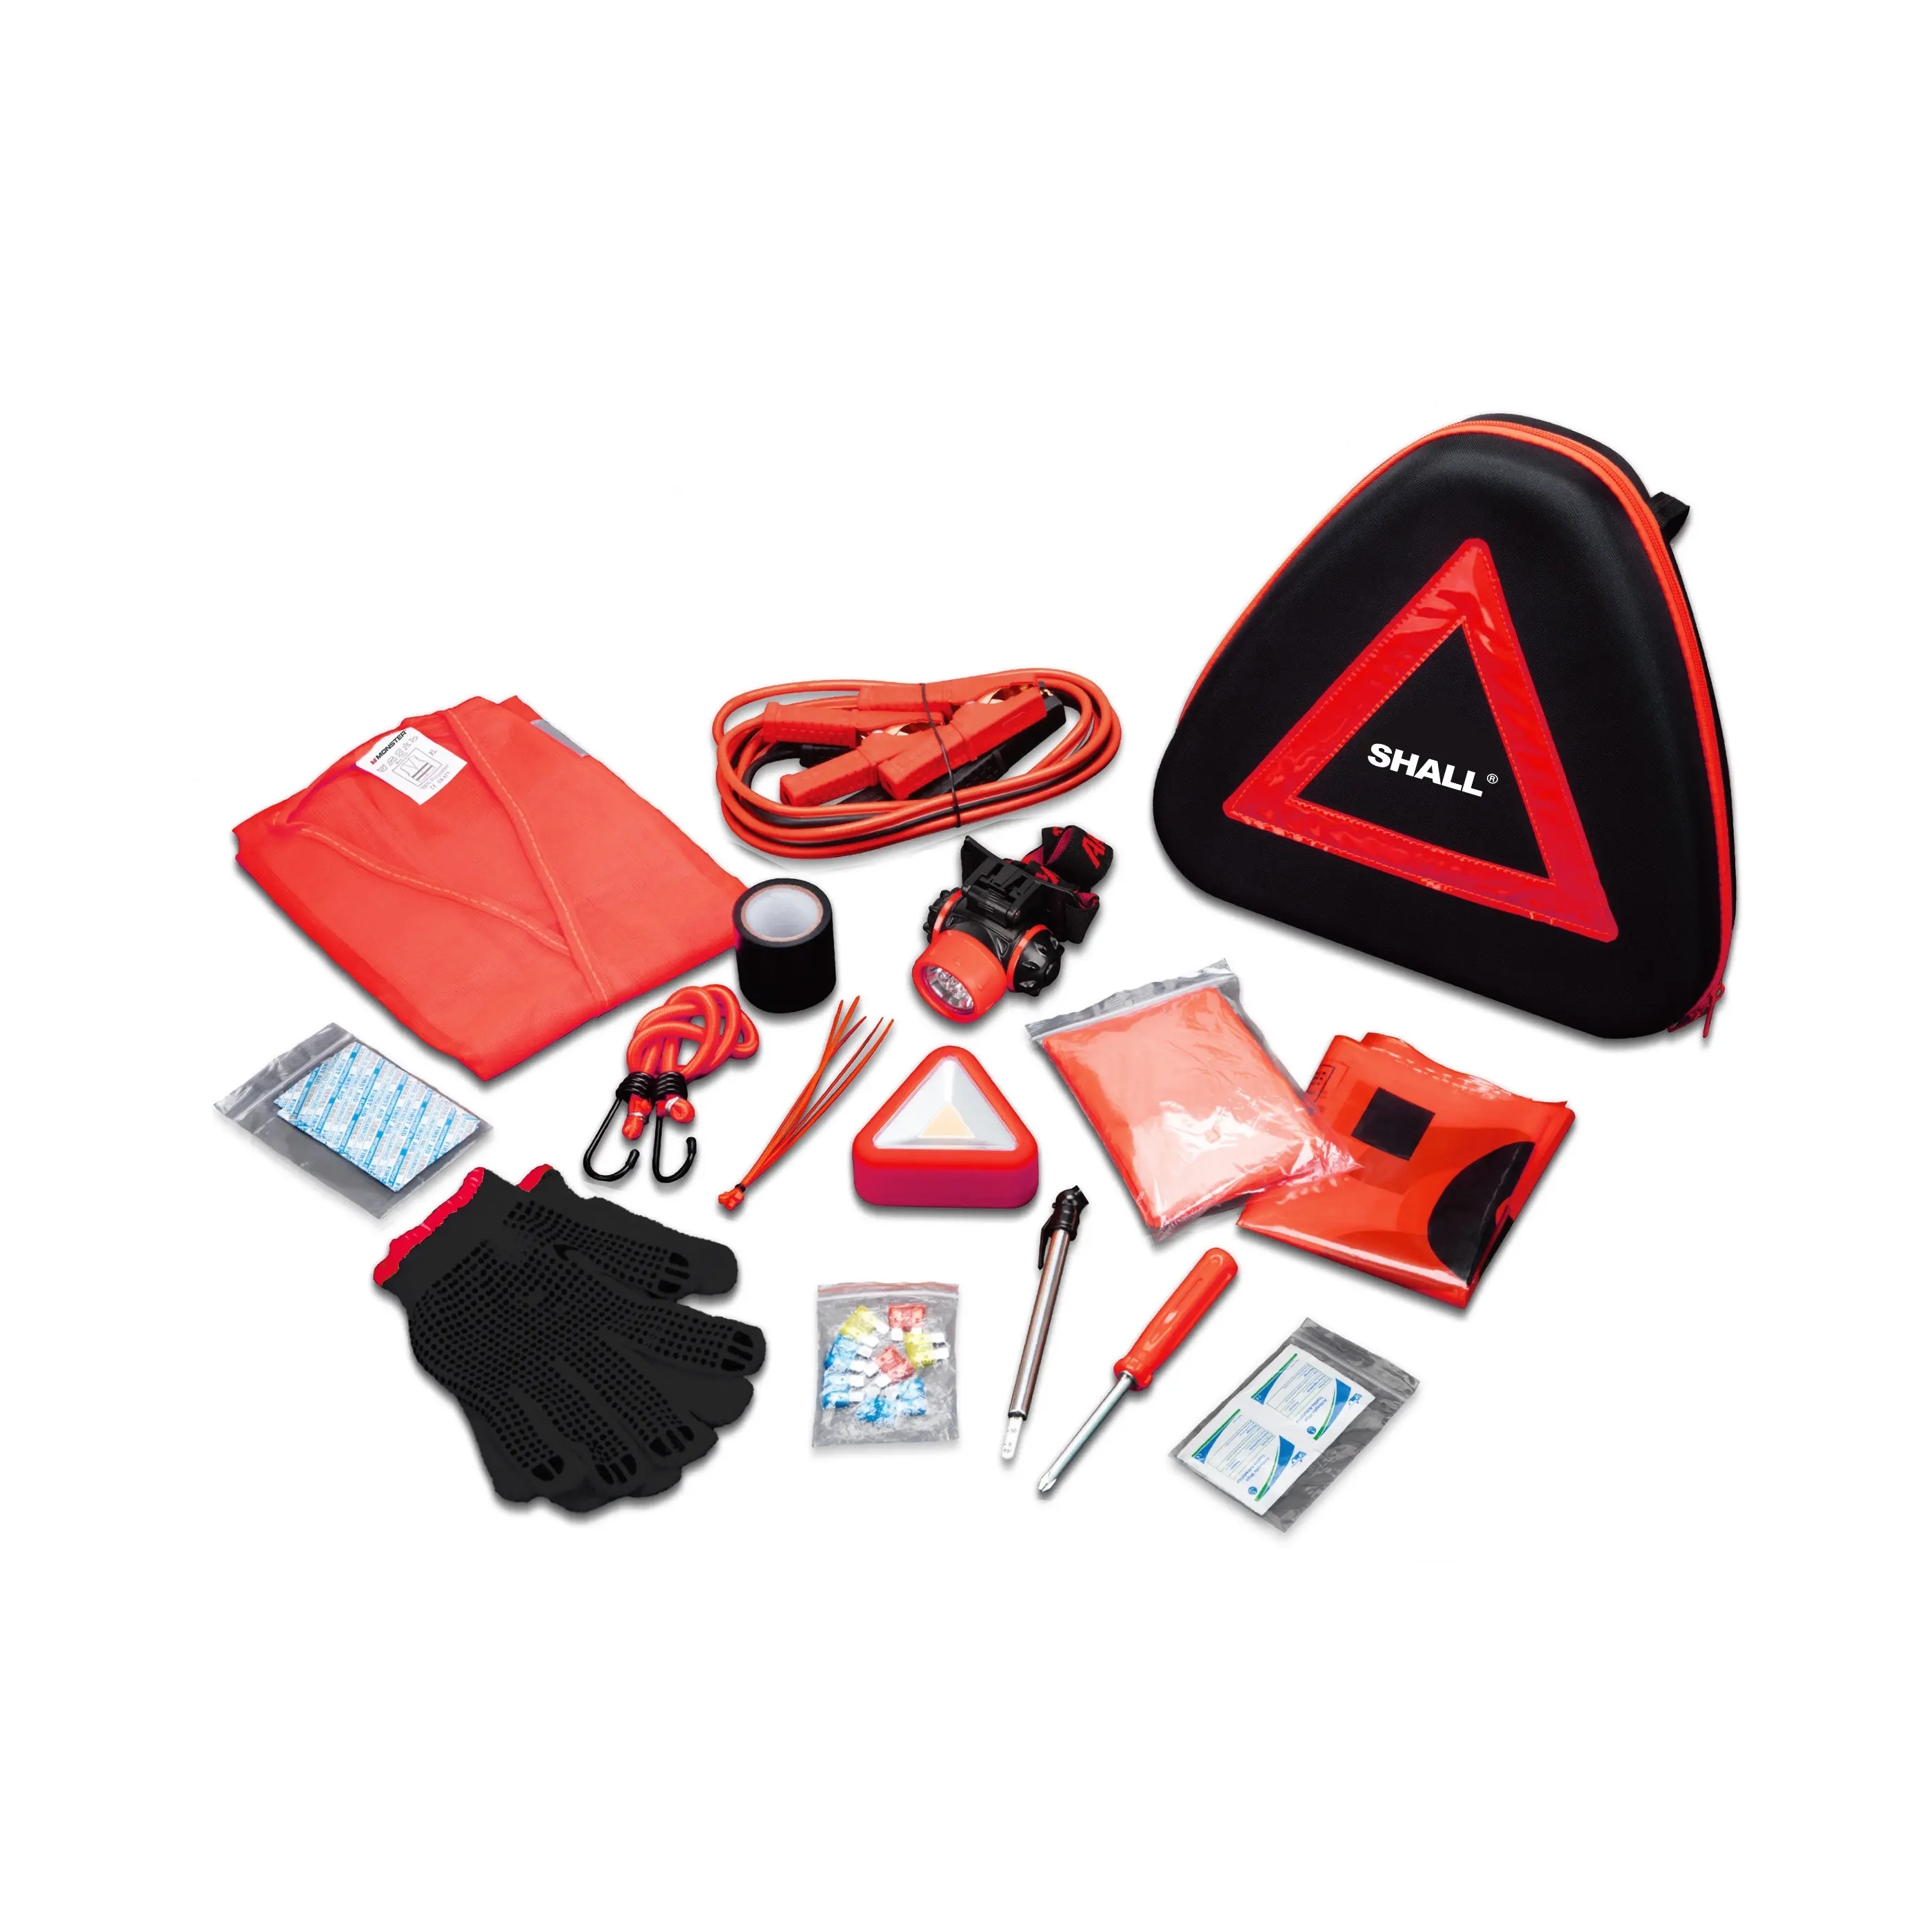 45pc Car Emergency Kit Warning Triangle Reflective Vest Road Traffic Tool Fuse Kit Include Screwdriver Gloves First Aid Kit Cheap